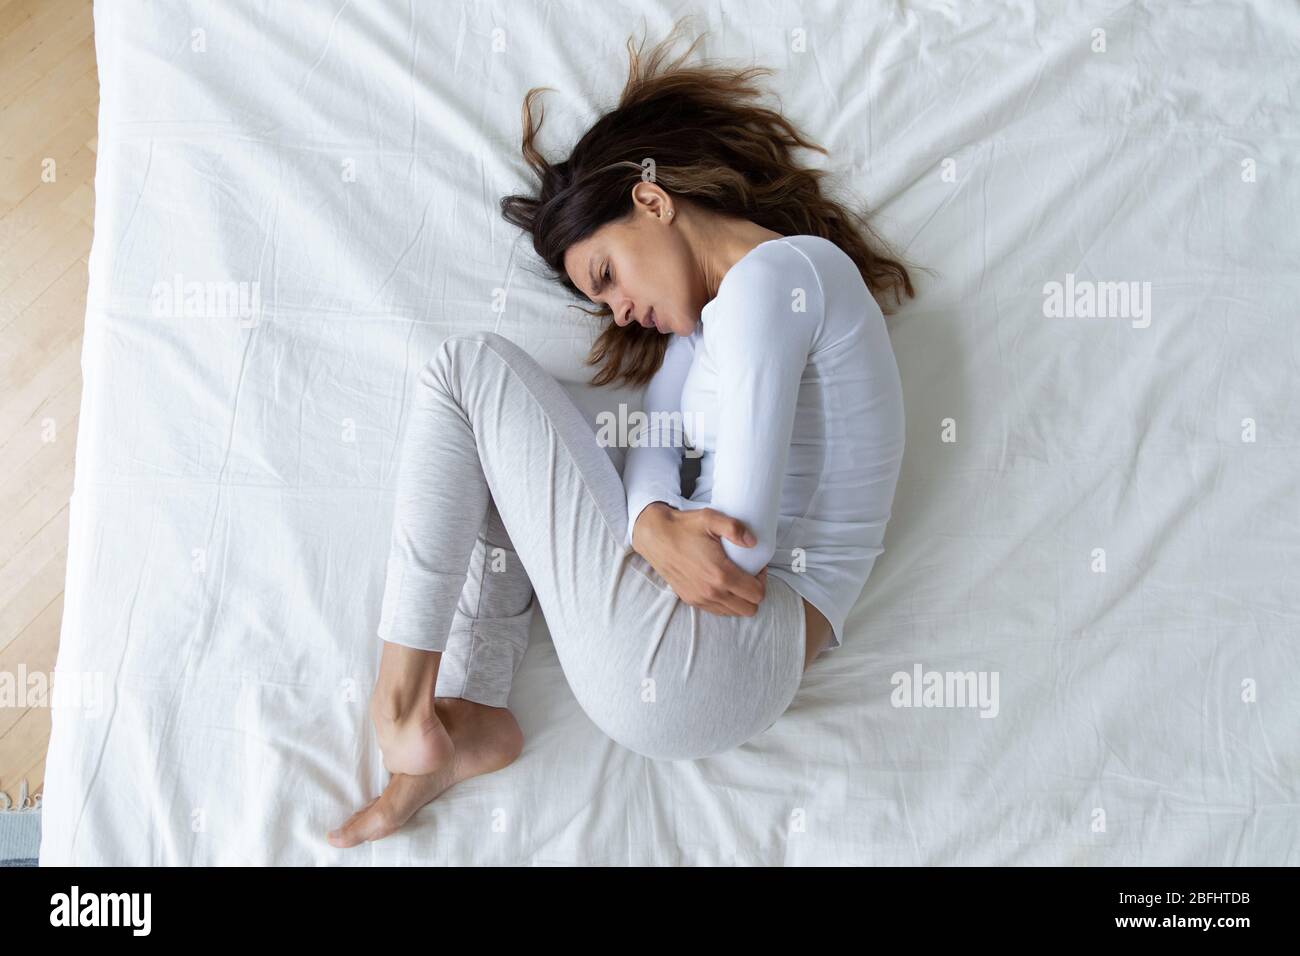 Top view stressed unhappy young woman lying in fetal position Stock Photo